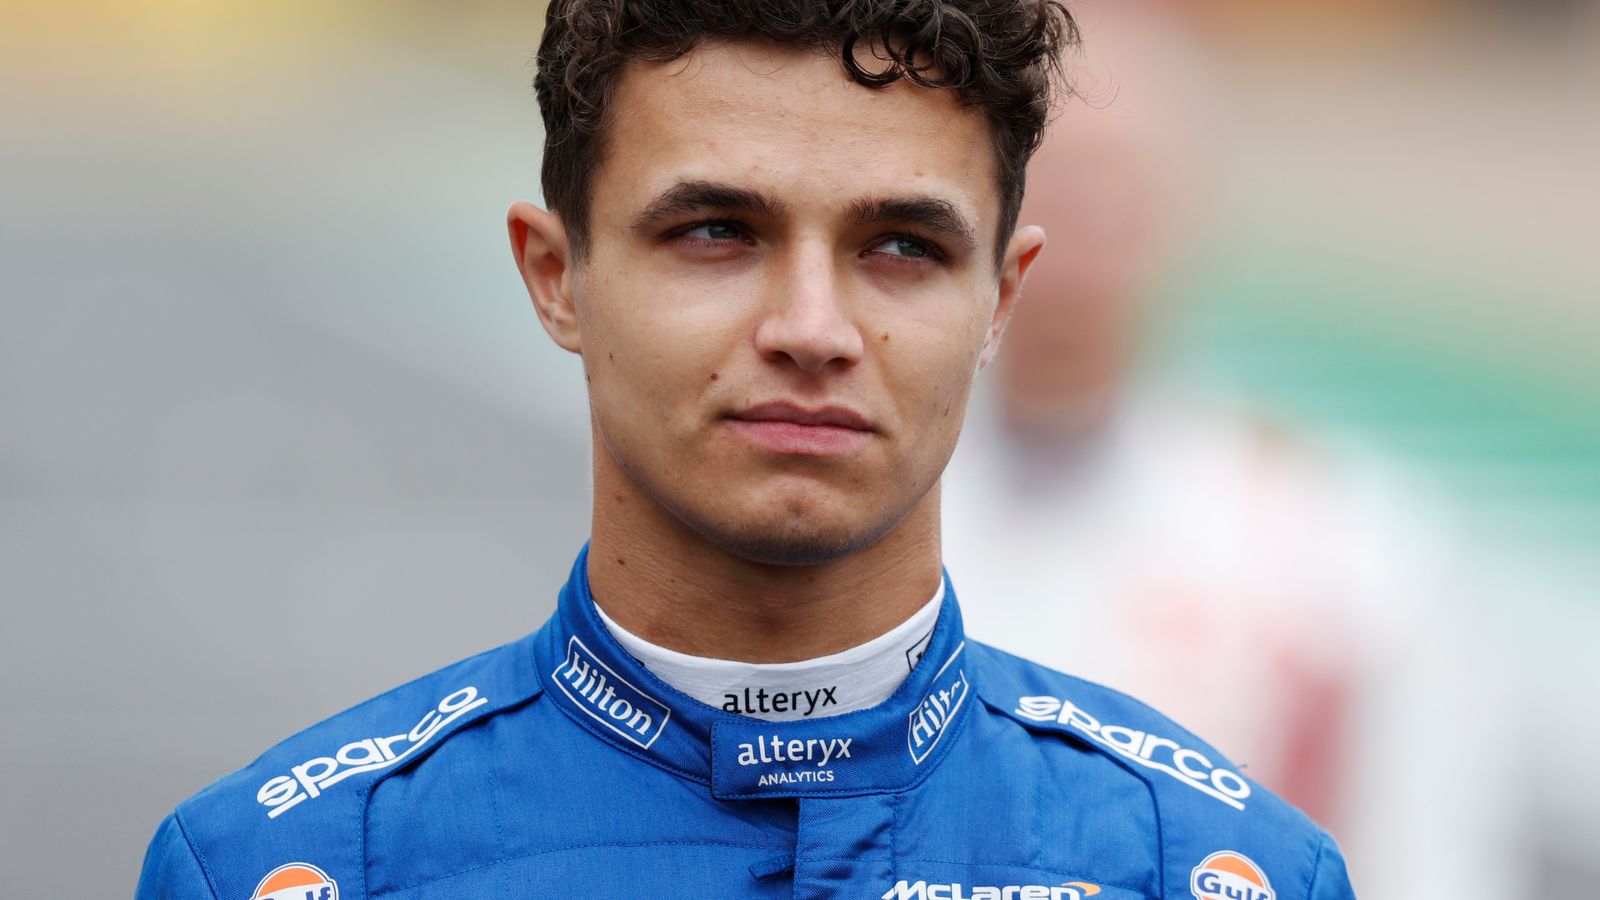 British GP Lando Norris 'not in perfect condition' and struggling to